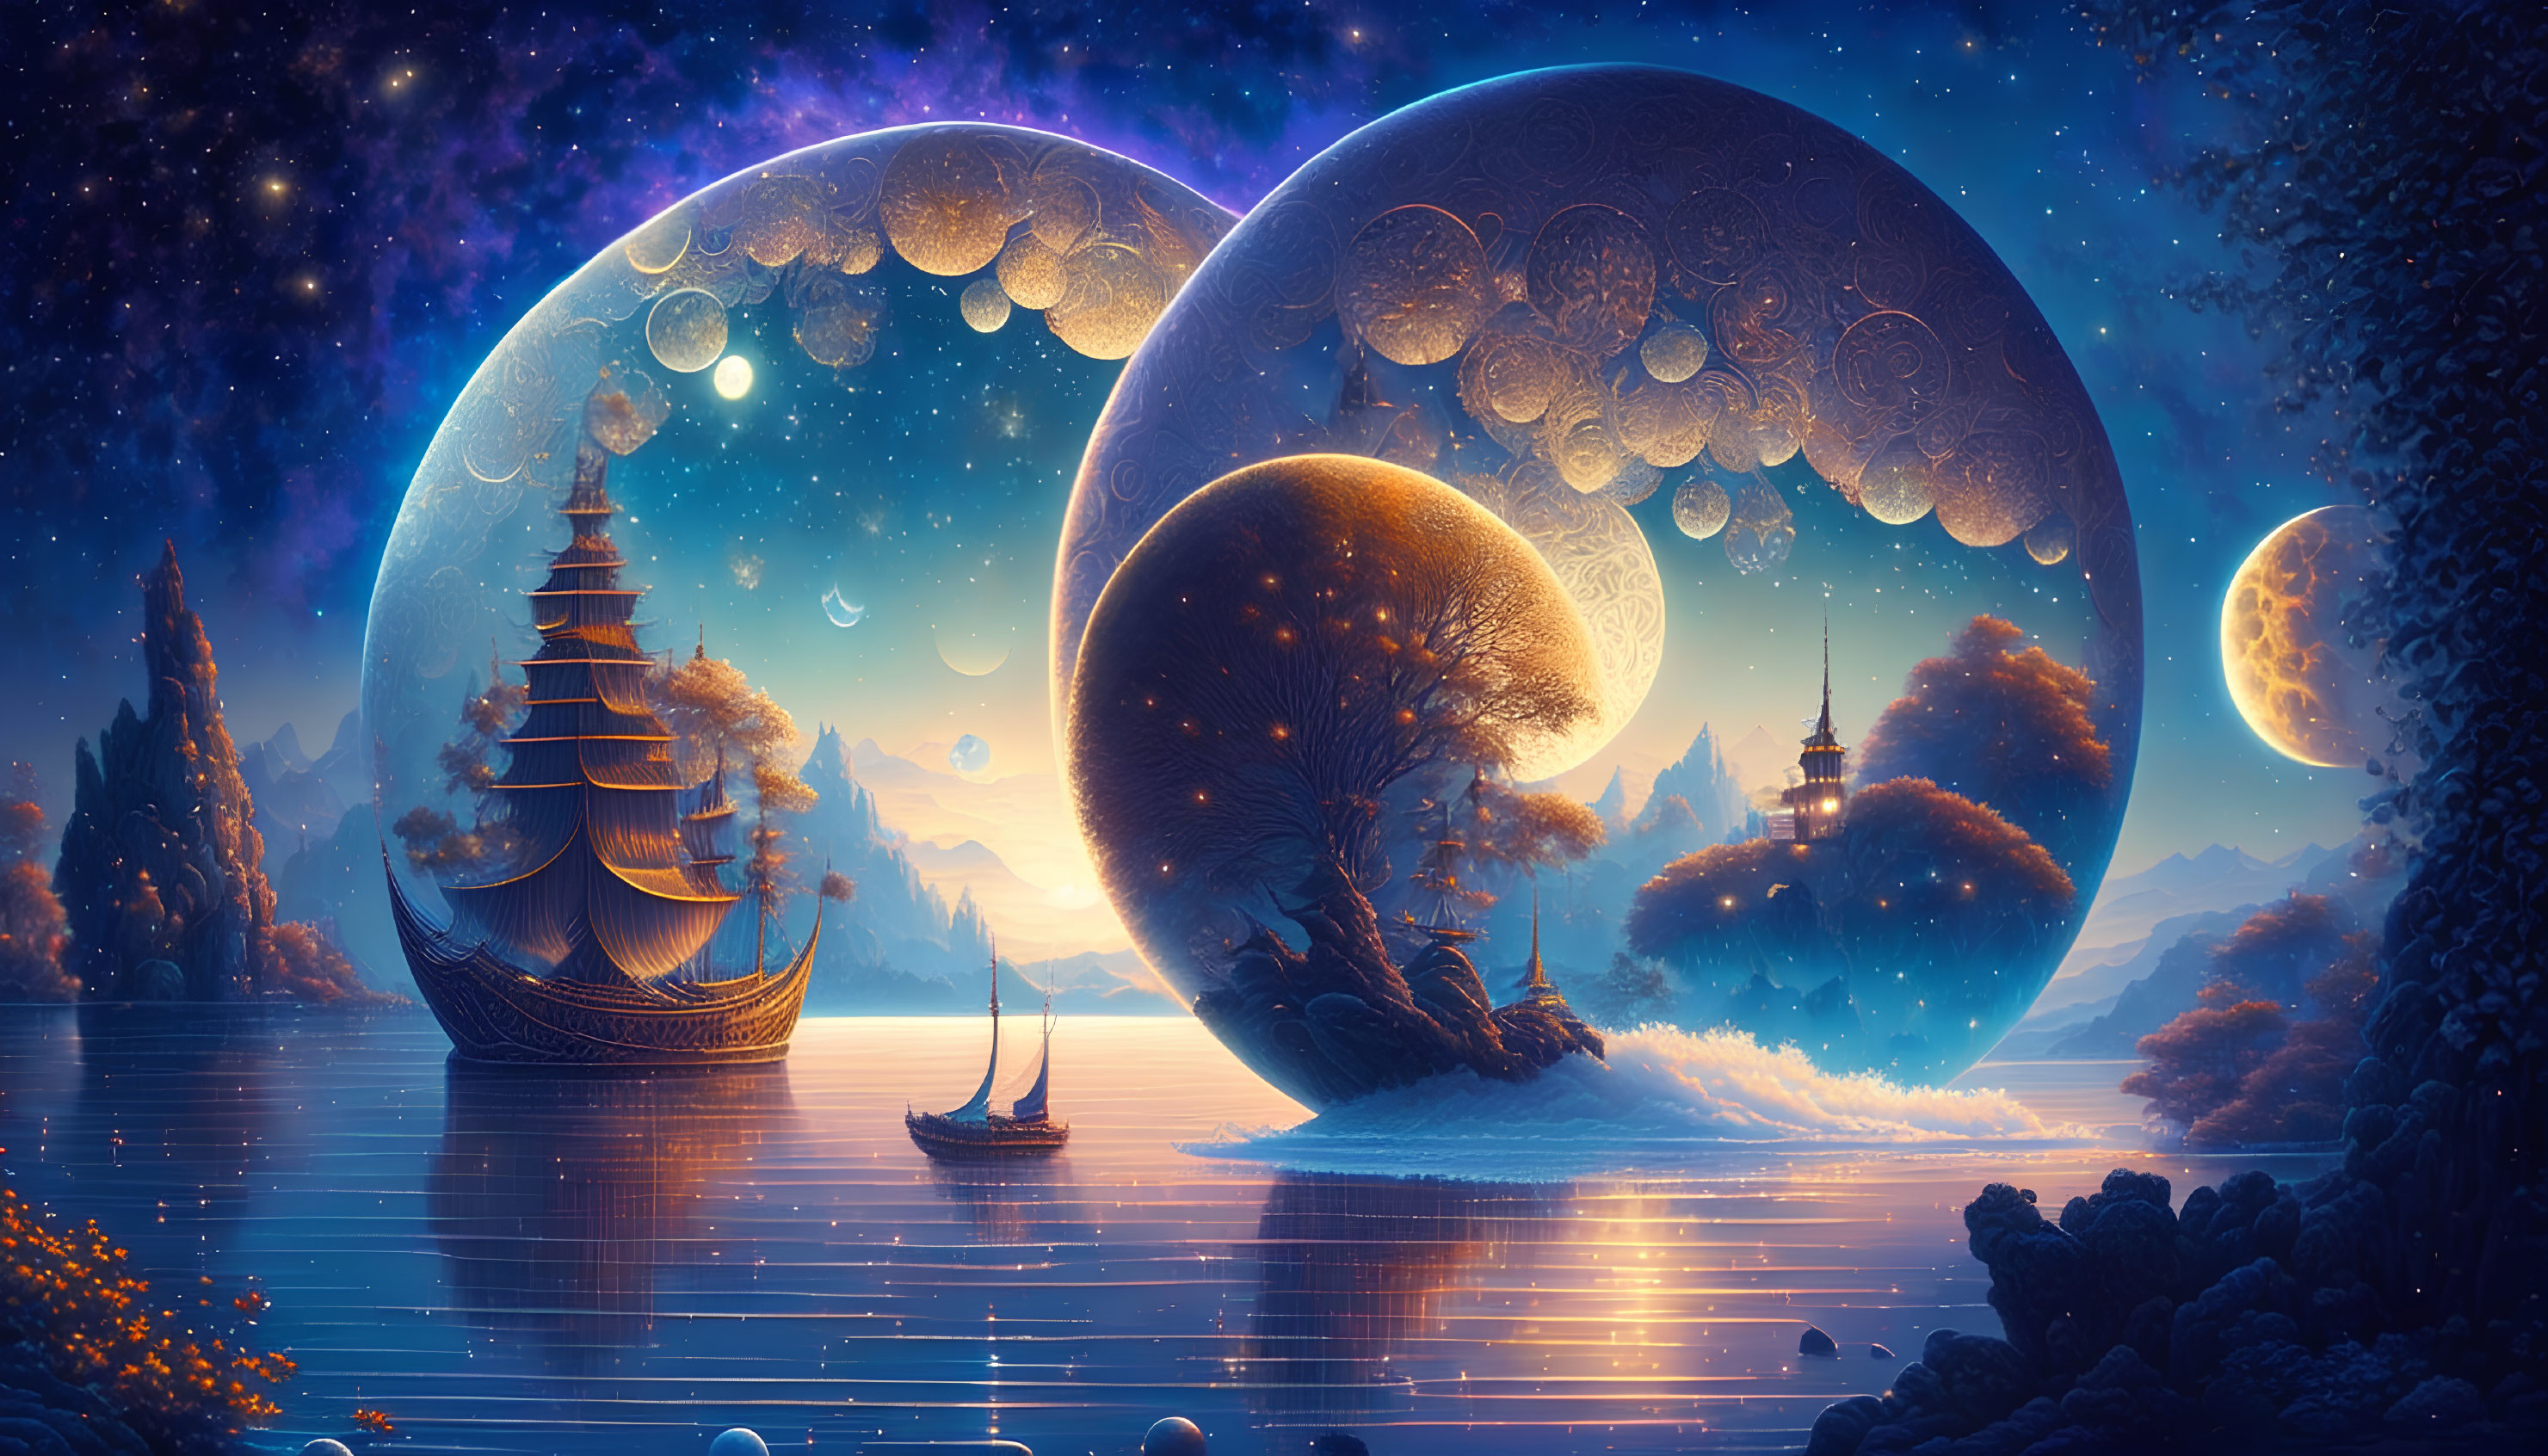 Vibrant surreal fantasy landscape with sailboat, cosmic orbs, and ethereal trees